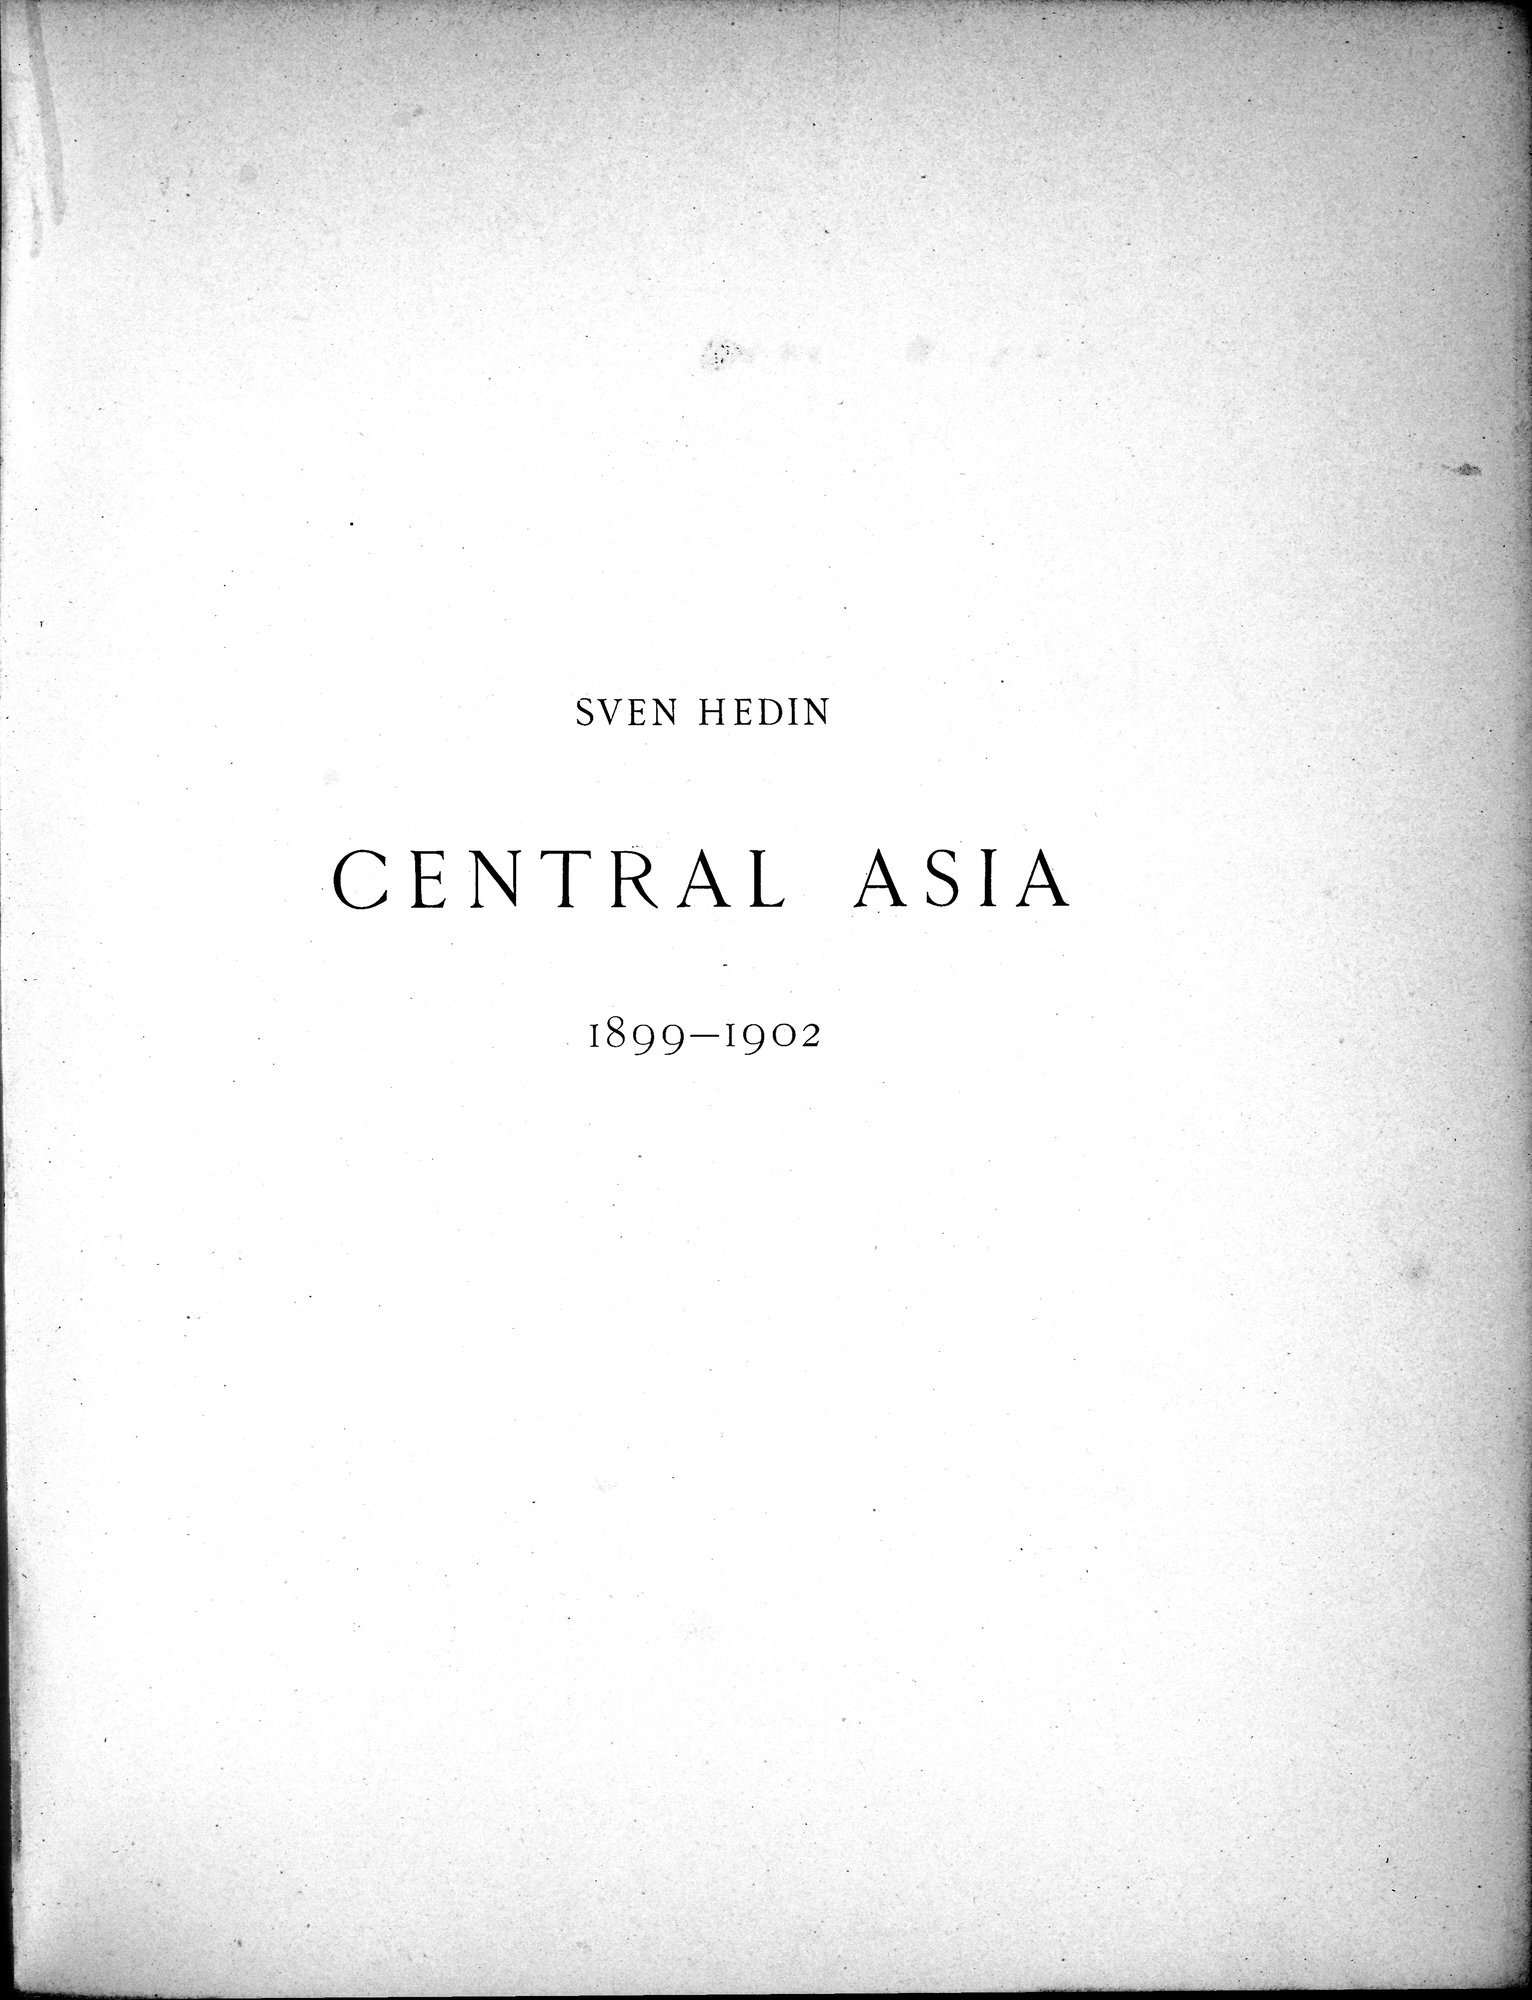 Scientific Results of a Journey in Central Asia, 1899-1902 : vol.1 / 7 ページ（白黒高解像度画像）